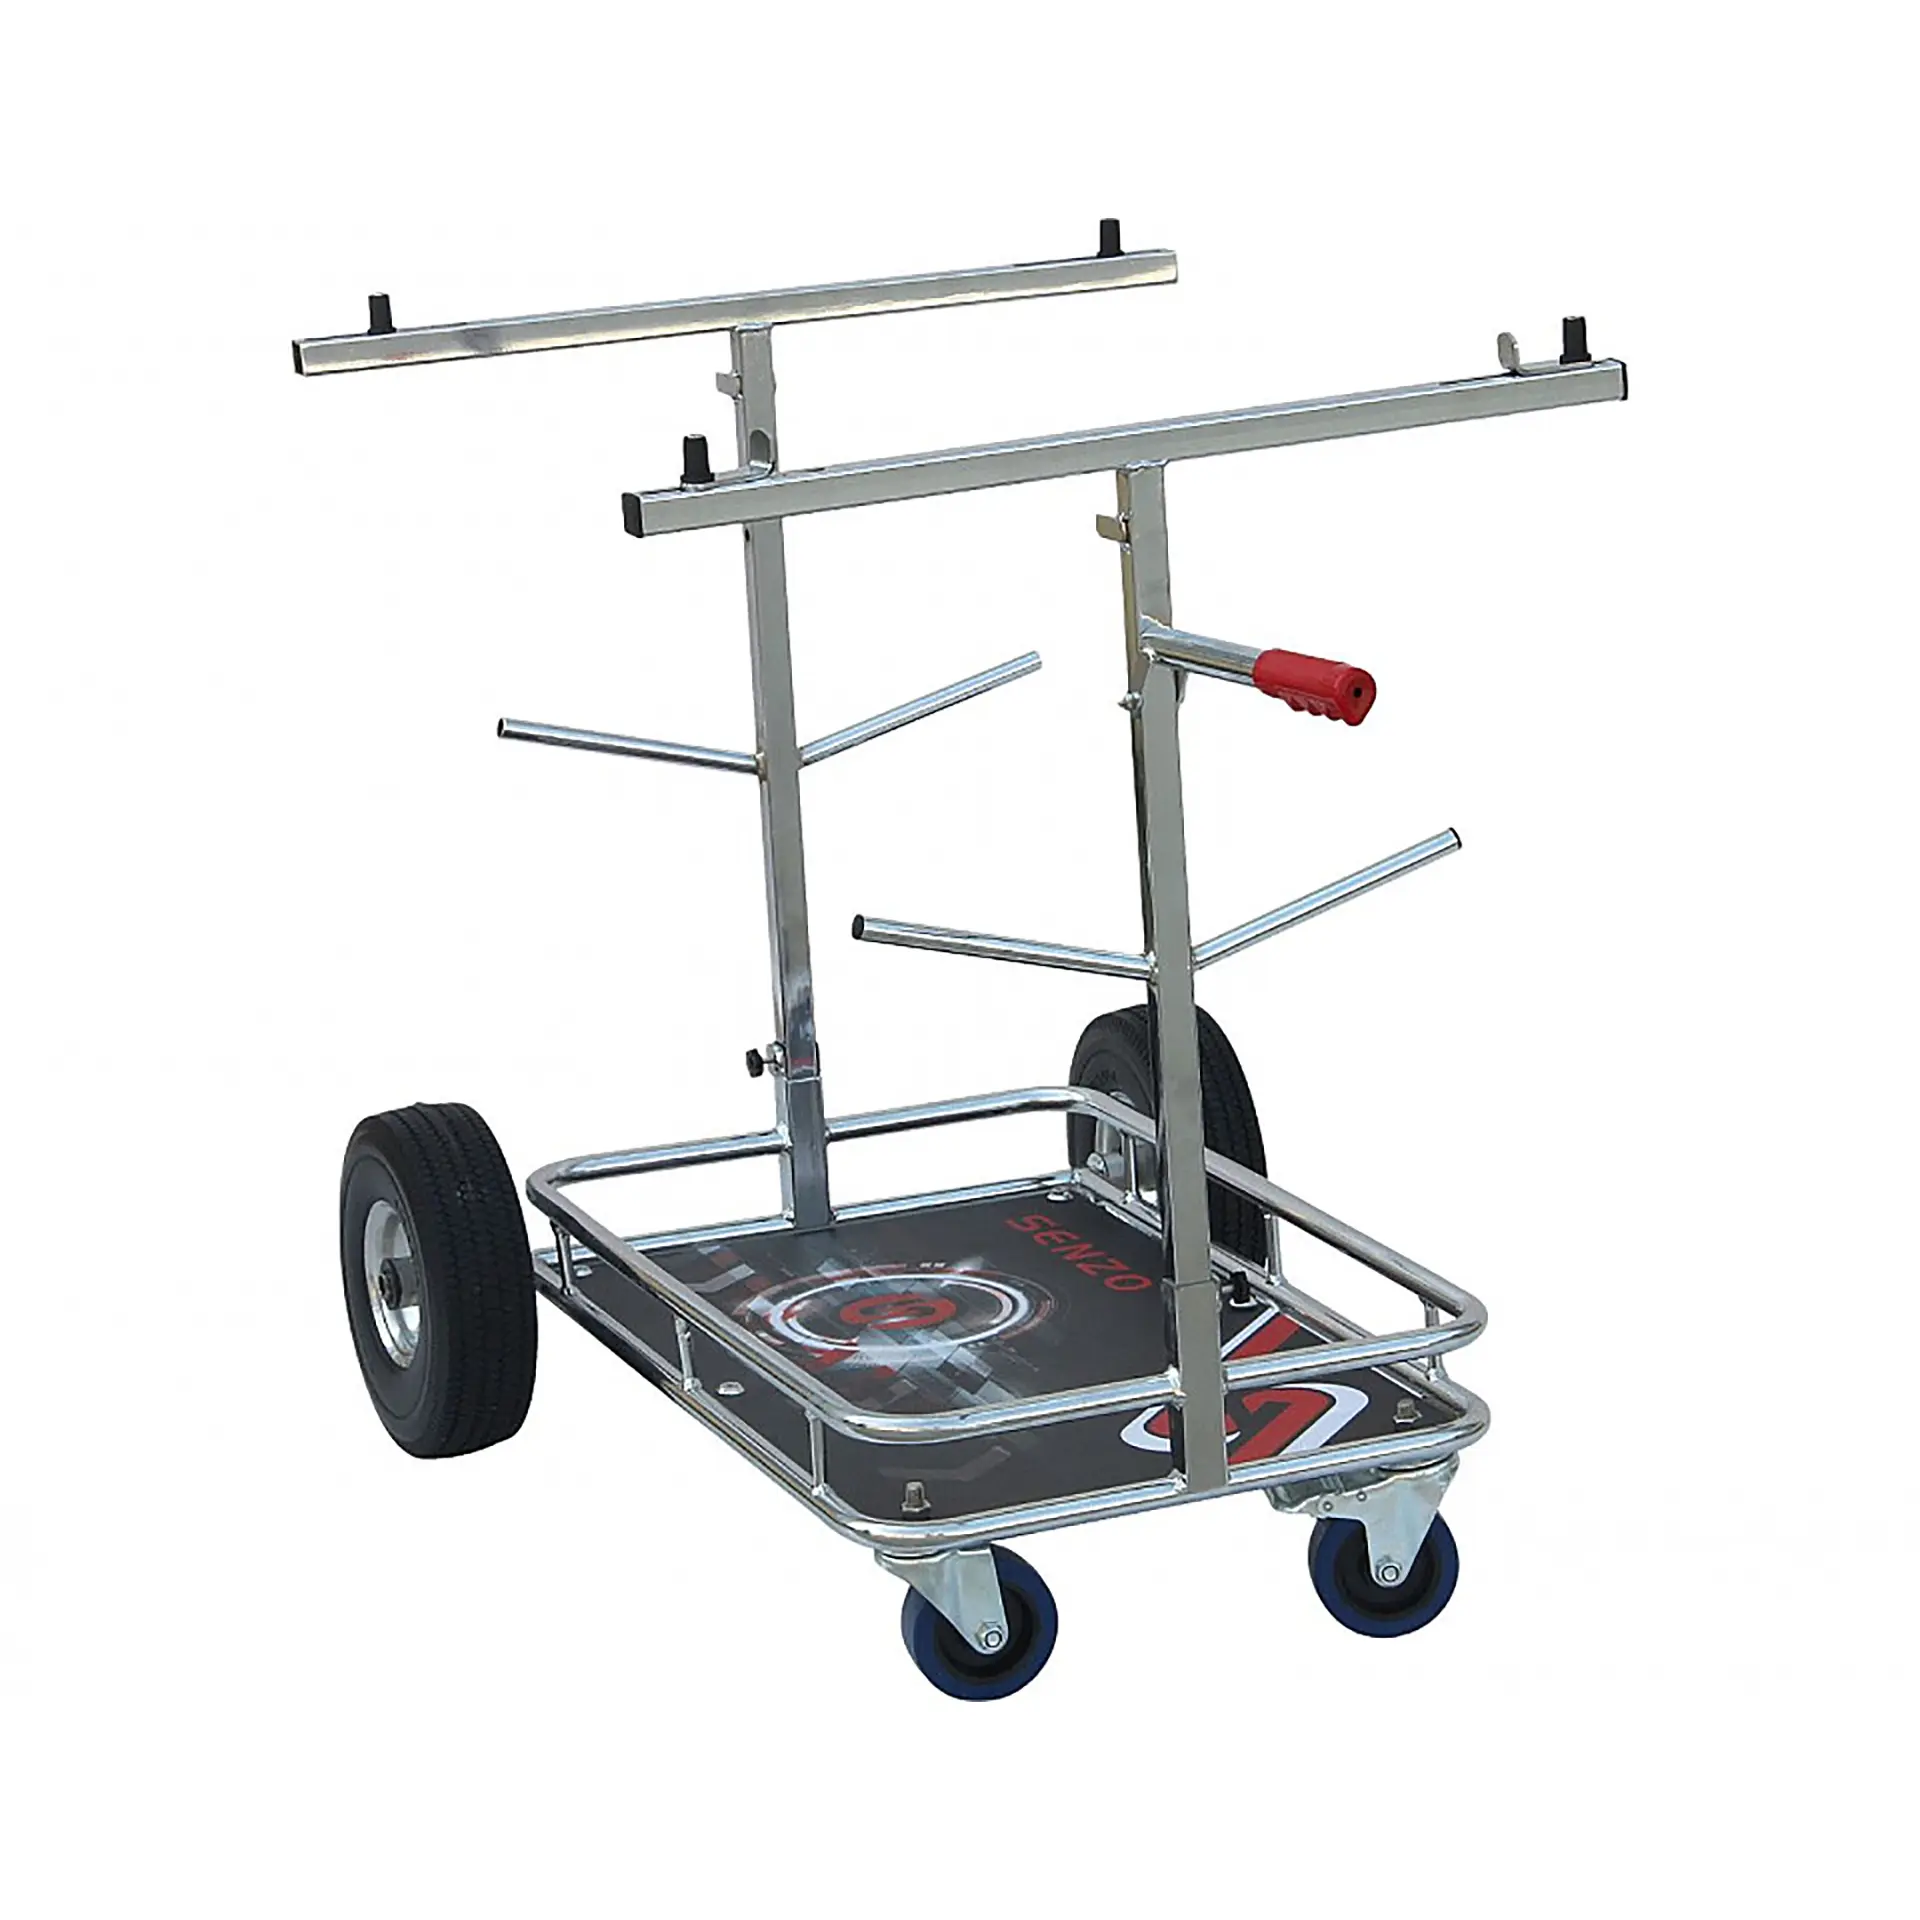 What to Look for When Buying Go Kart Stands